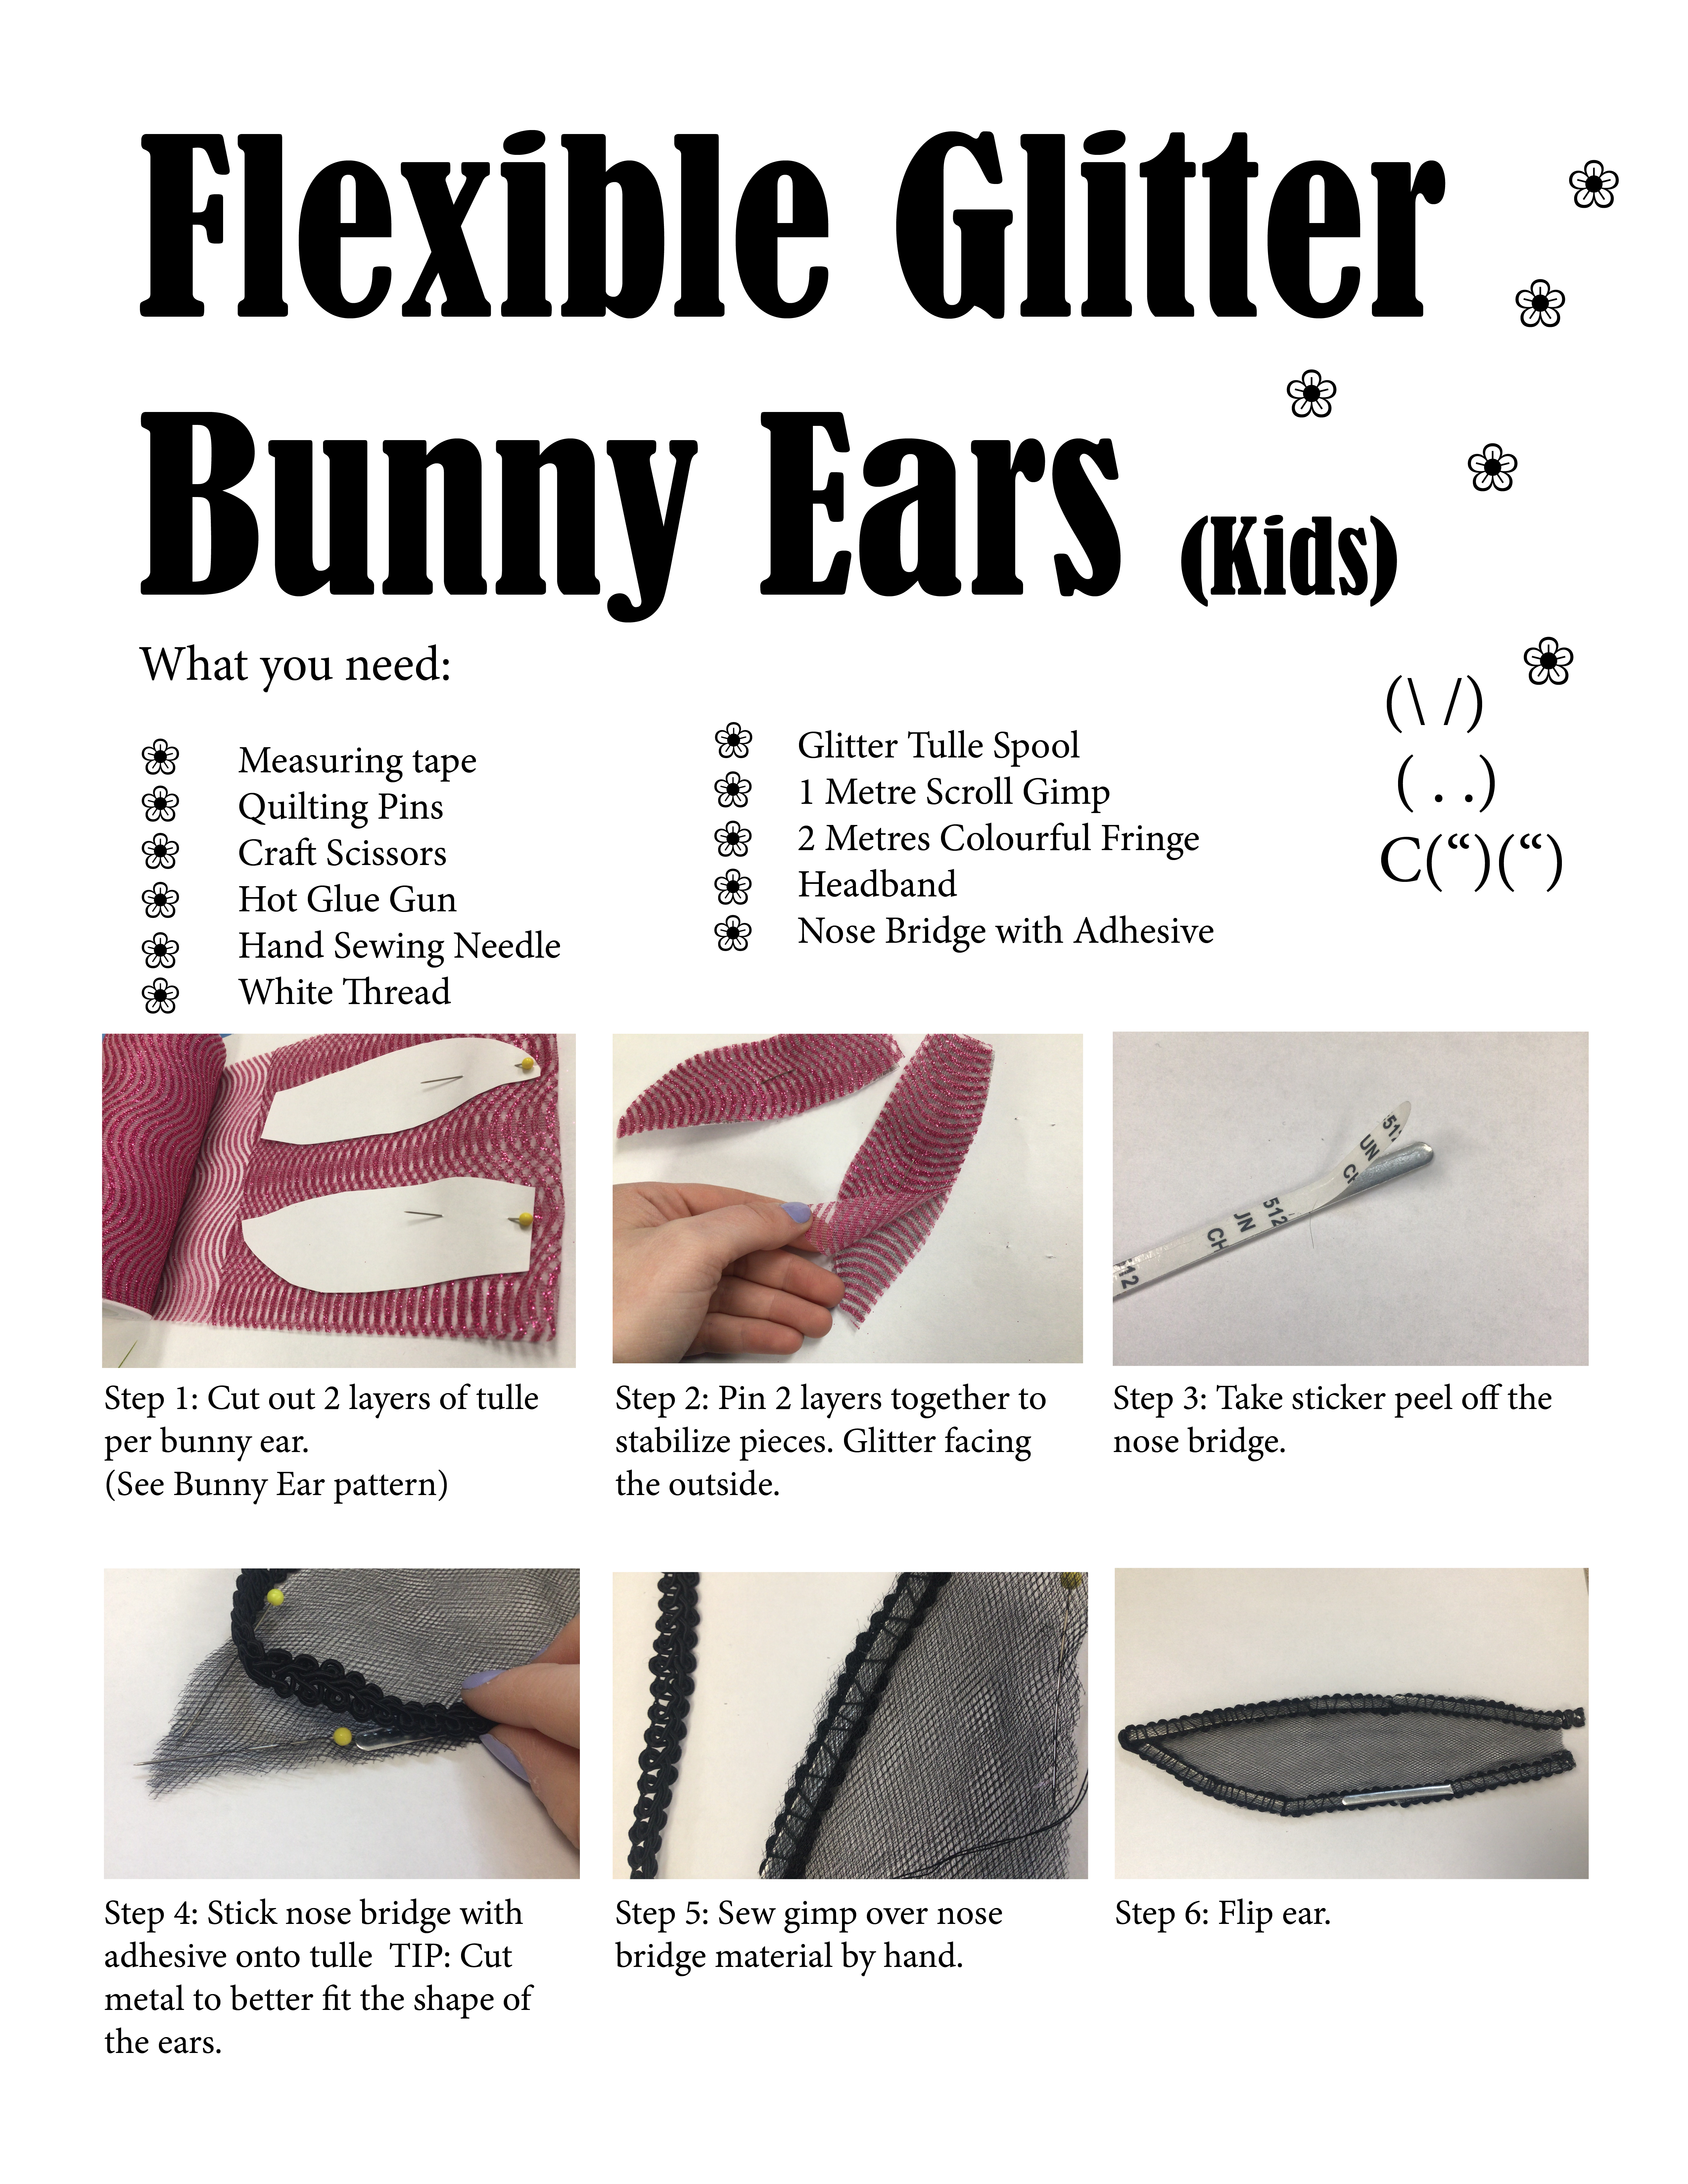 First set of steps to creating your own flexible bunny ears for children